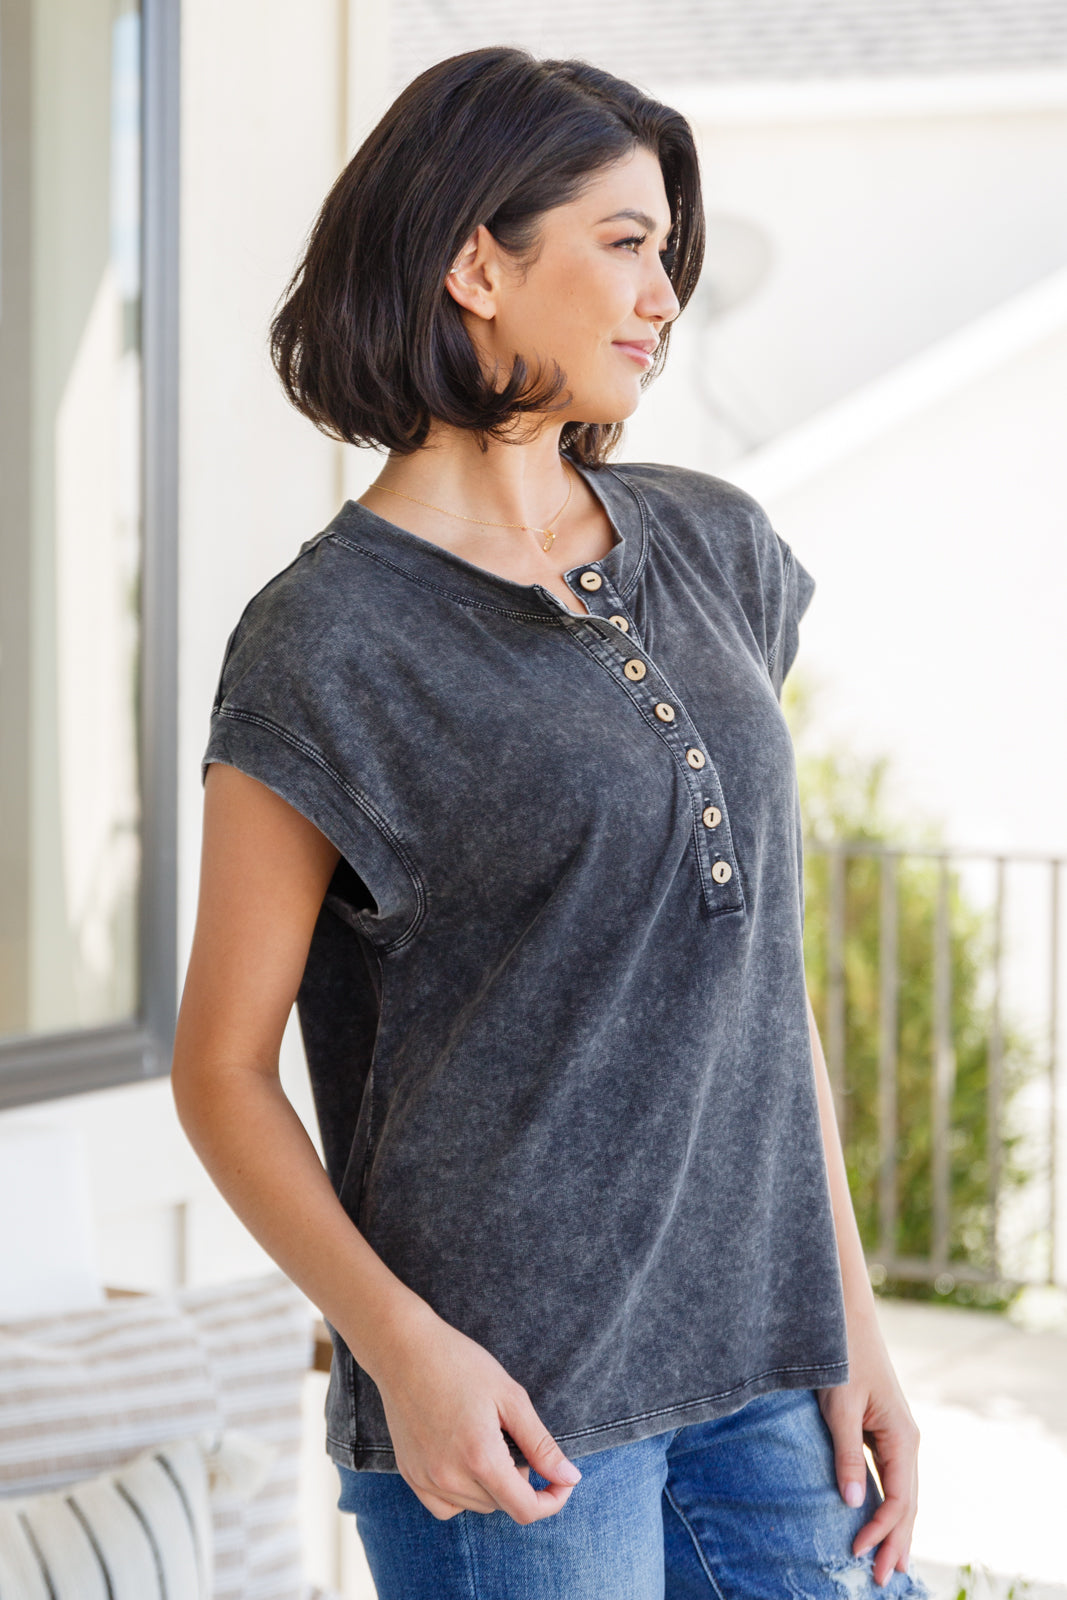 She's Alright Mineral Wash Sleeveless Henley-Short Sleeve Tops-Inspired by Justeen-Women's Clothing Boutique in Chicago, Illinois